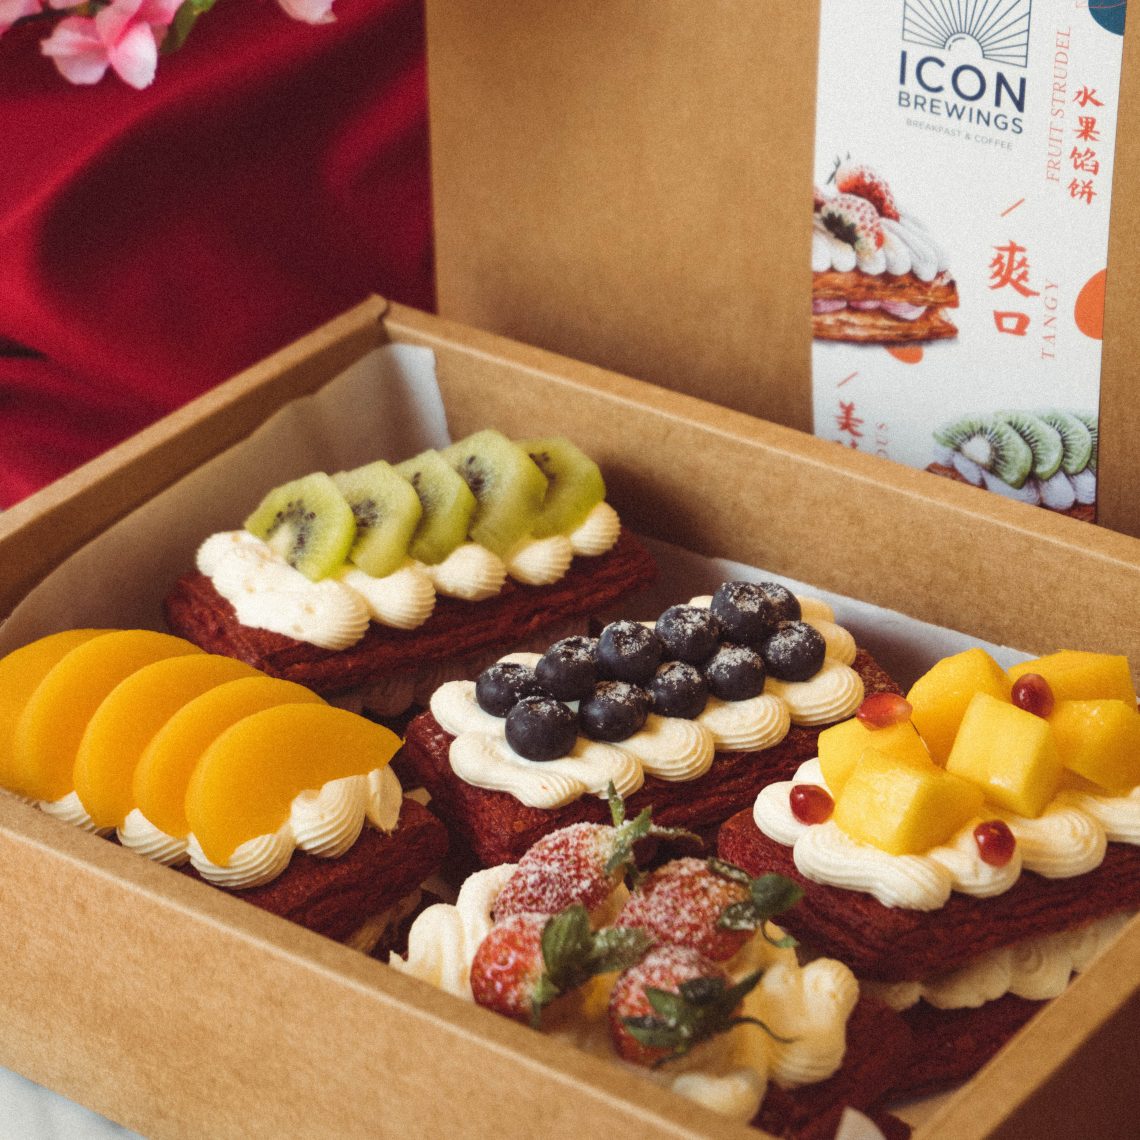 LOCAL PATISSIER & CAFE – ICON BREWINGS’ INTRODUCES CNY TWIST TO THEIR ...